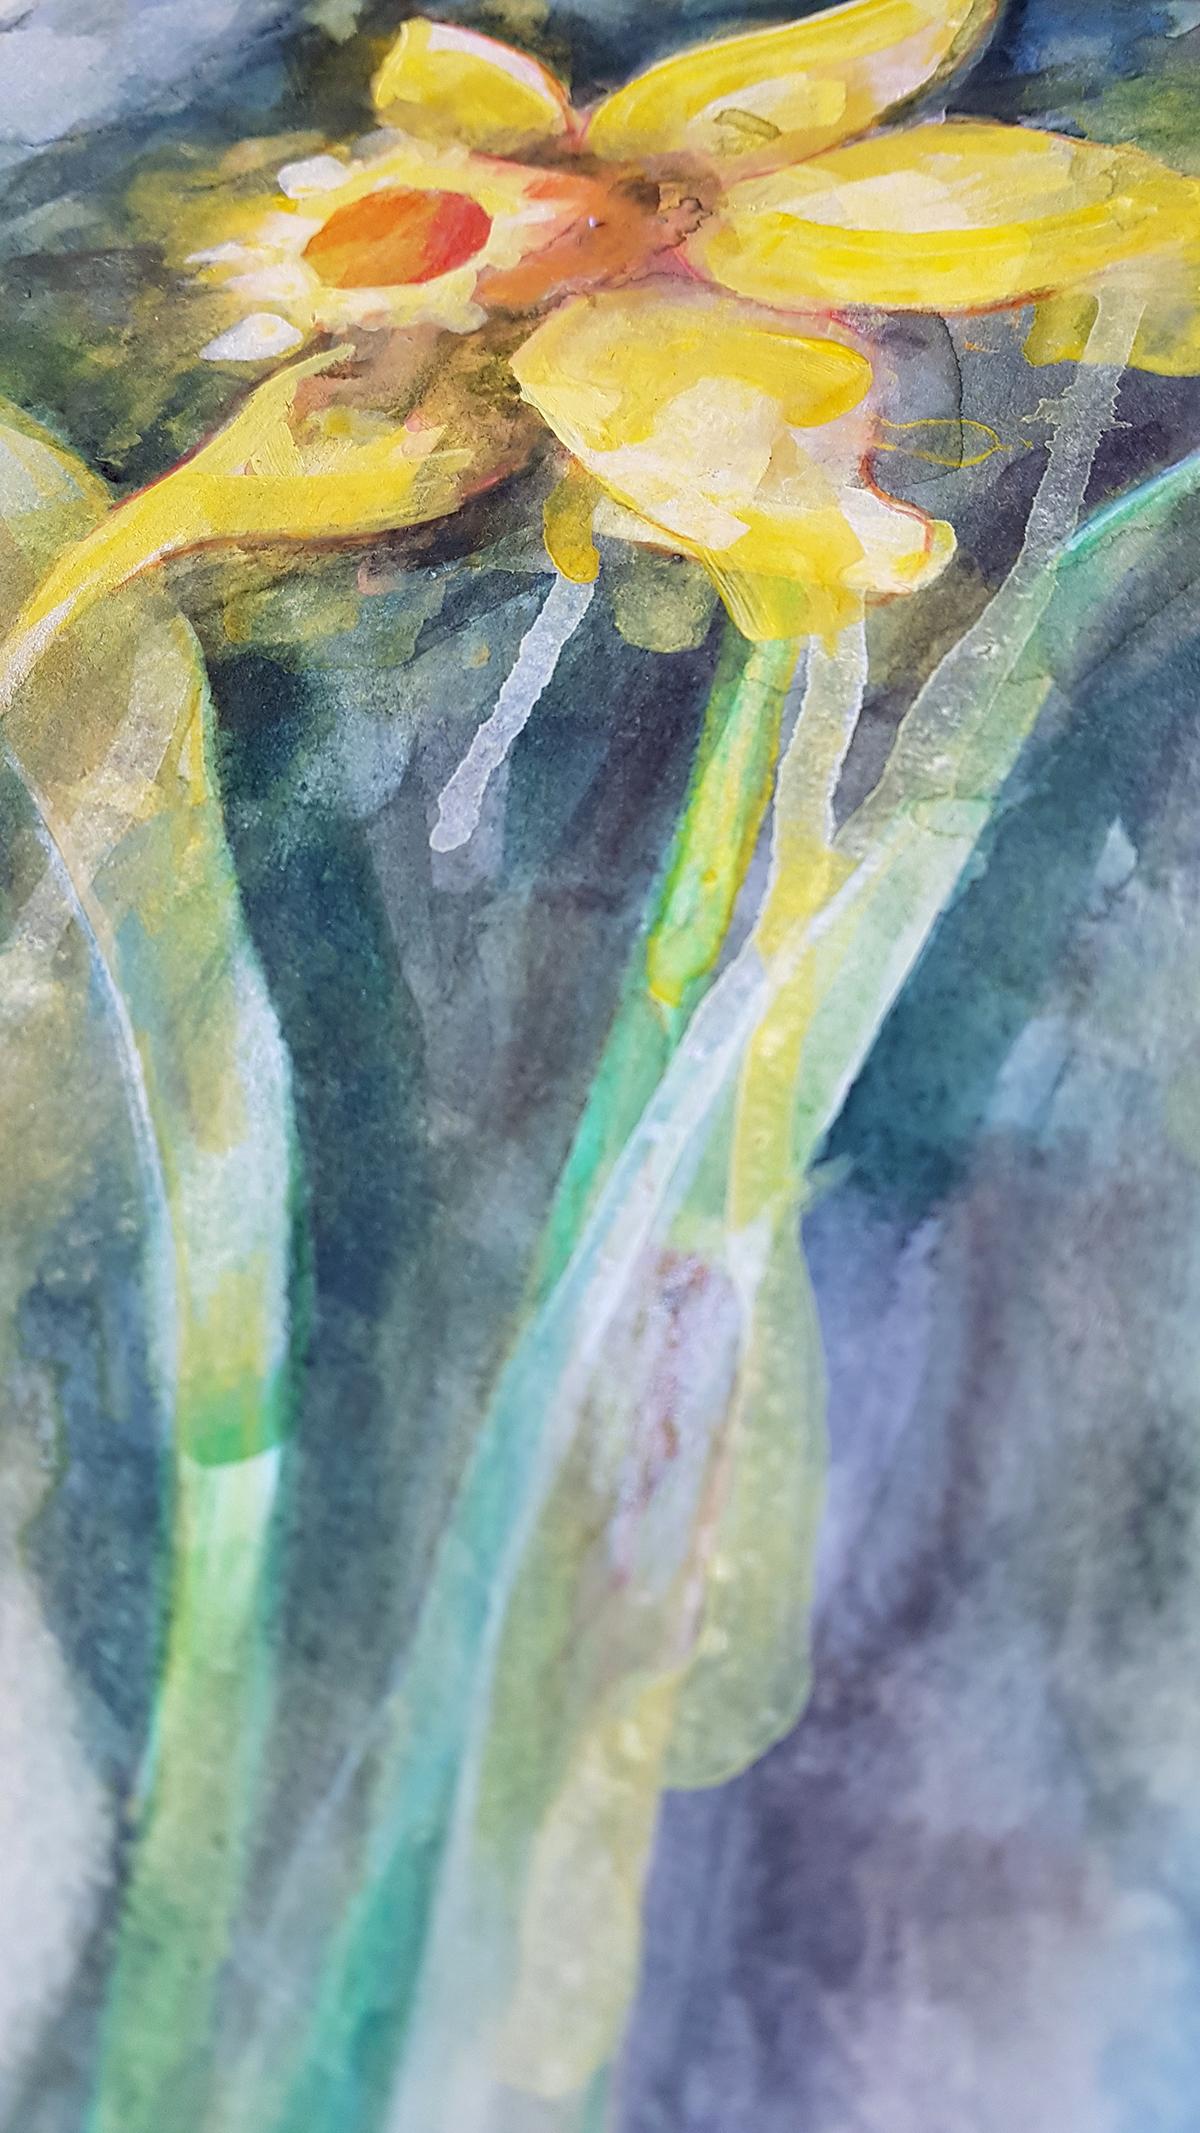 Daffodil by Gavin Dobson, contemporary art, original painting, watercolour paint 7